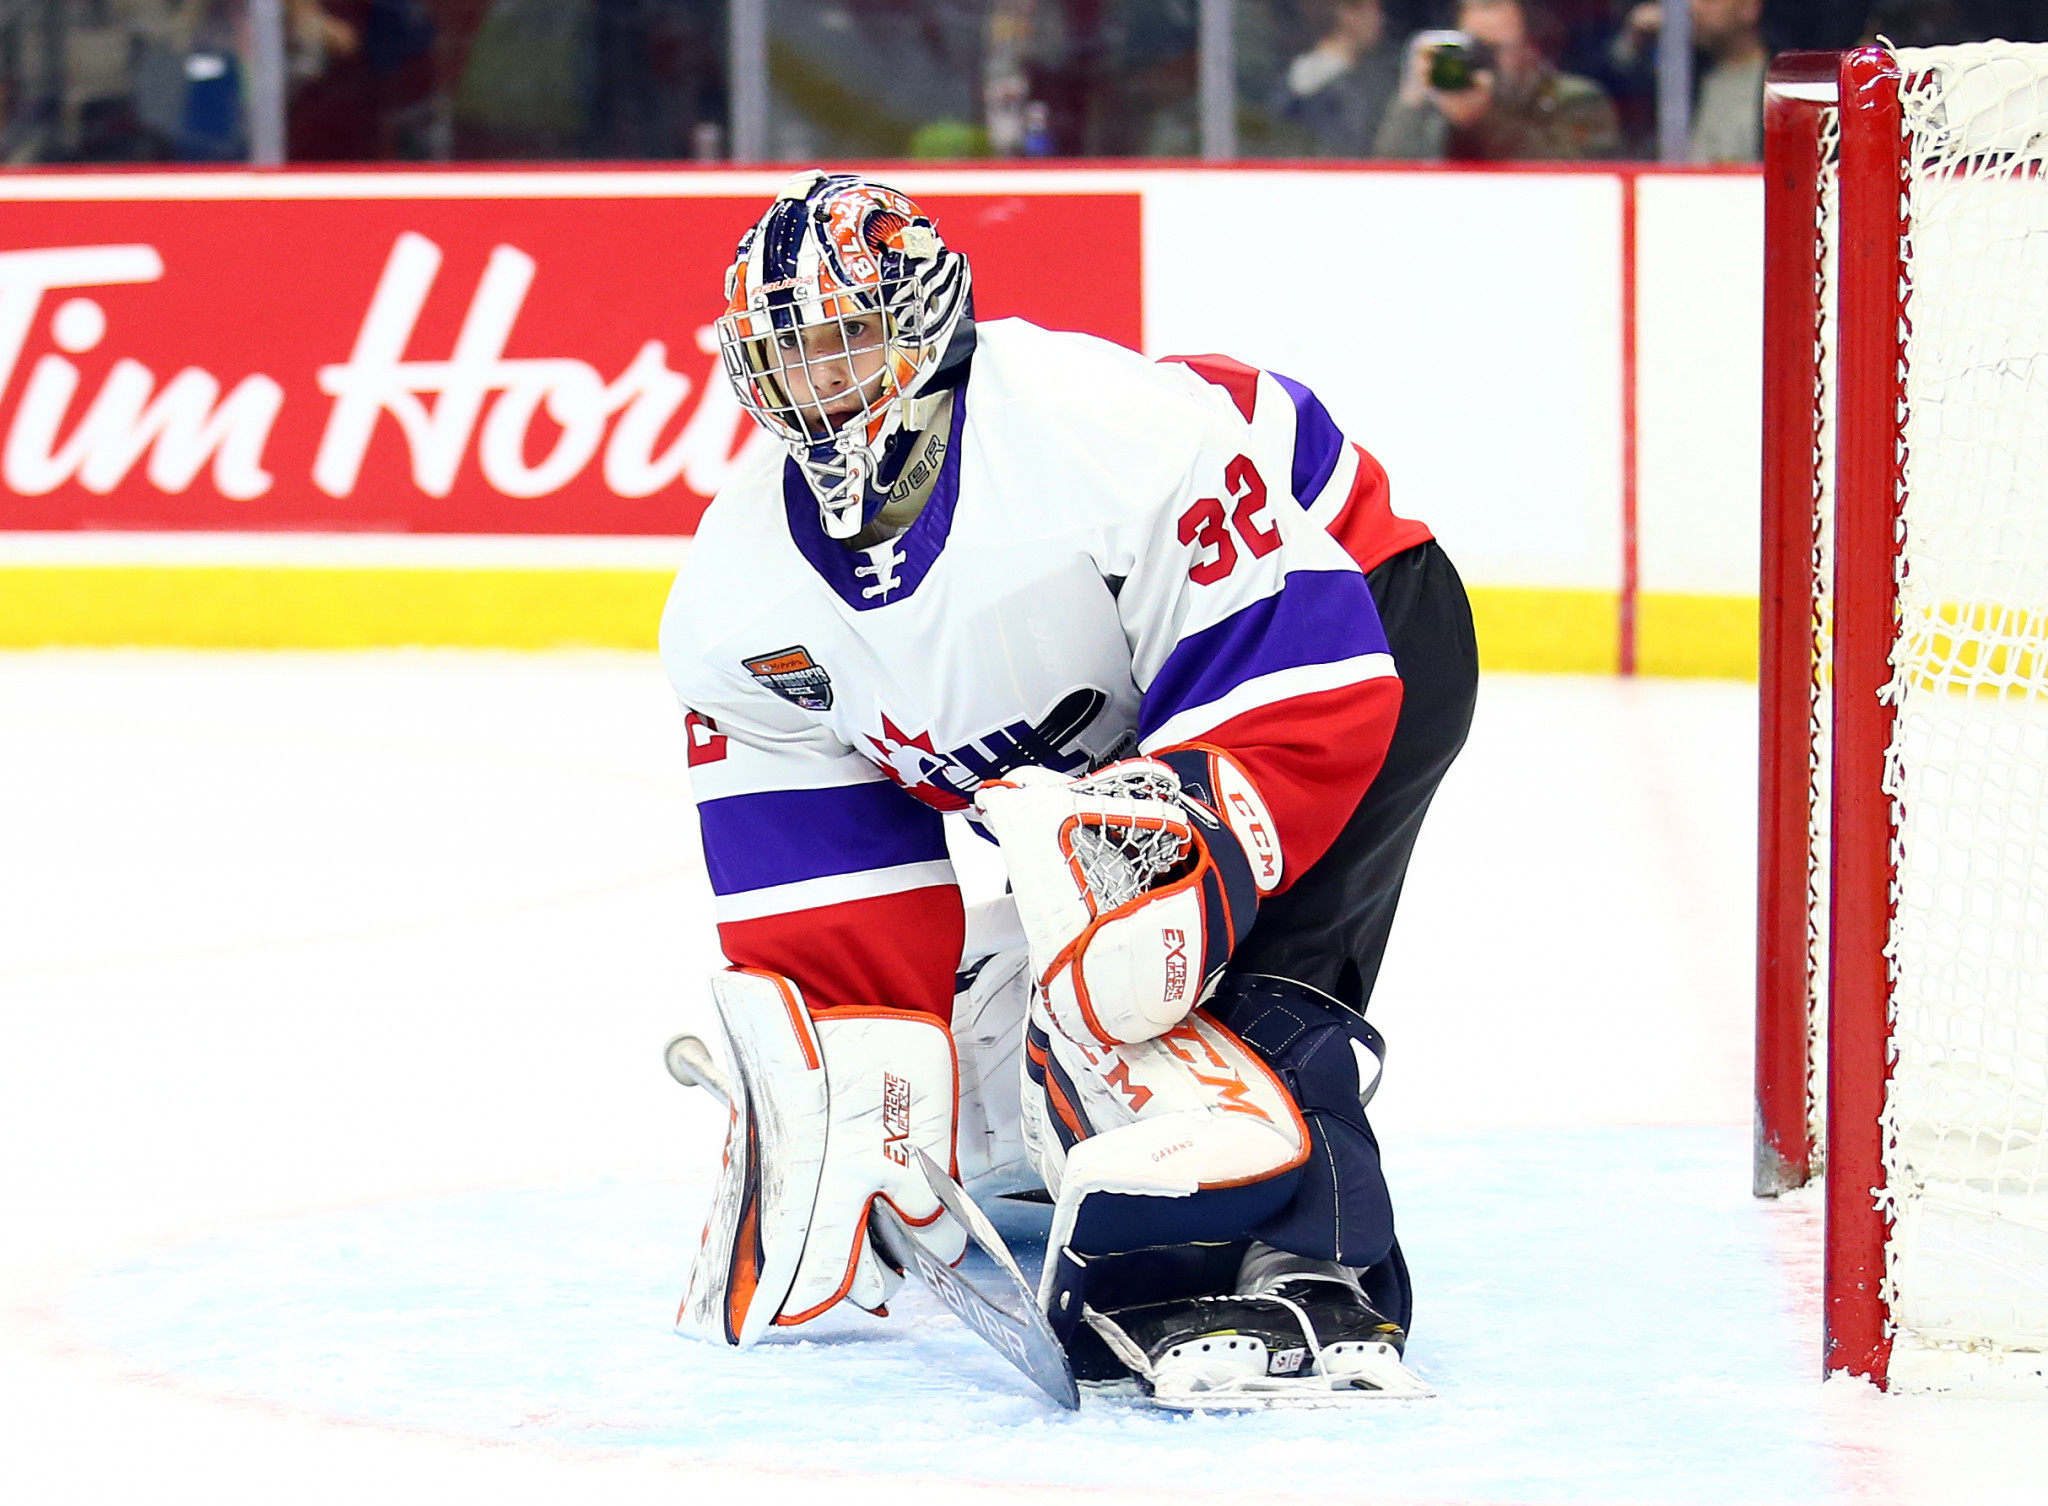 Goaltender Dylan Garand is one of the 25 players called up to Canada's national team for the 2022 IIHF World Junior Championship ©Getty Images